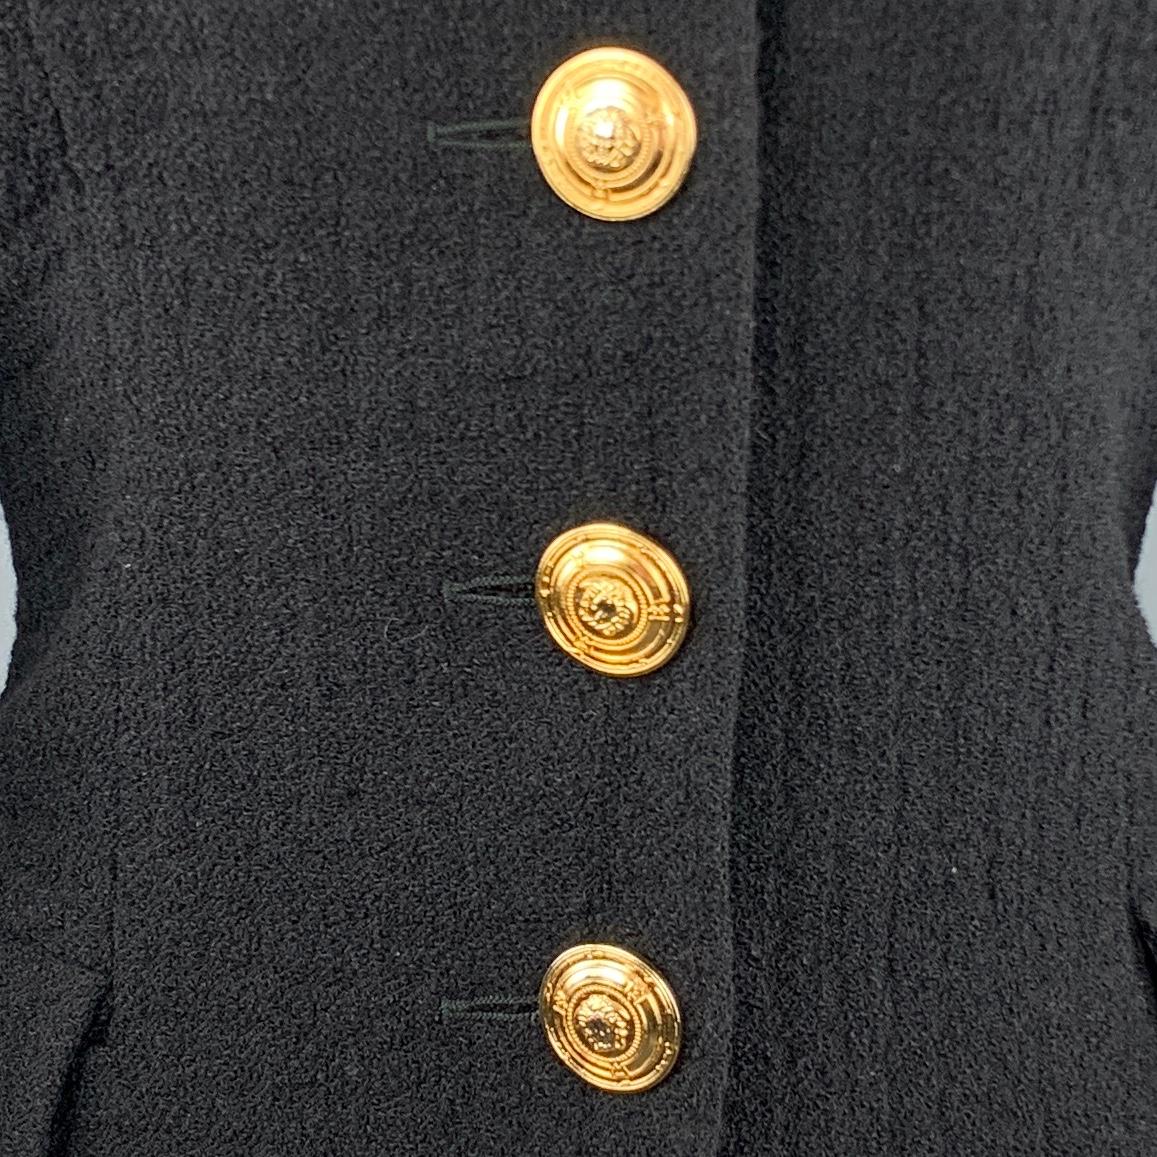 Vintage 1990's VERSACE JEANS COUTURE jacket by GIANNI VERSACE comes in wool blend textured fabric with a pointed lapel, cropped hem, and gold tone Medusa buttons. Made in Italy.

Very Good Pre-Owned Condition.
Marked: 28/42

Measurements:

Shoulder: